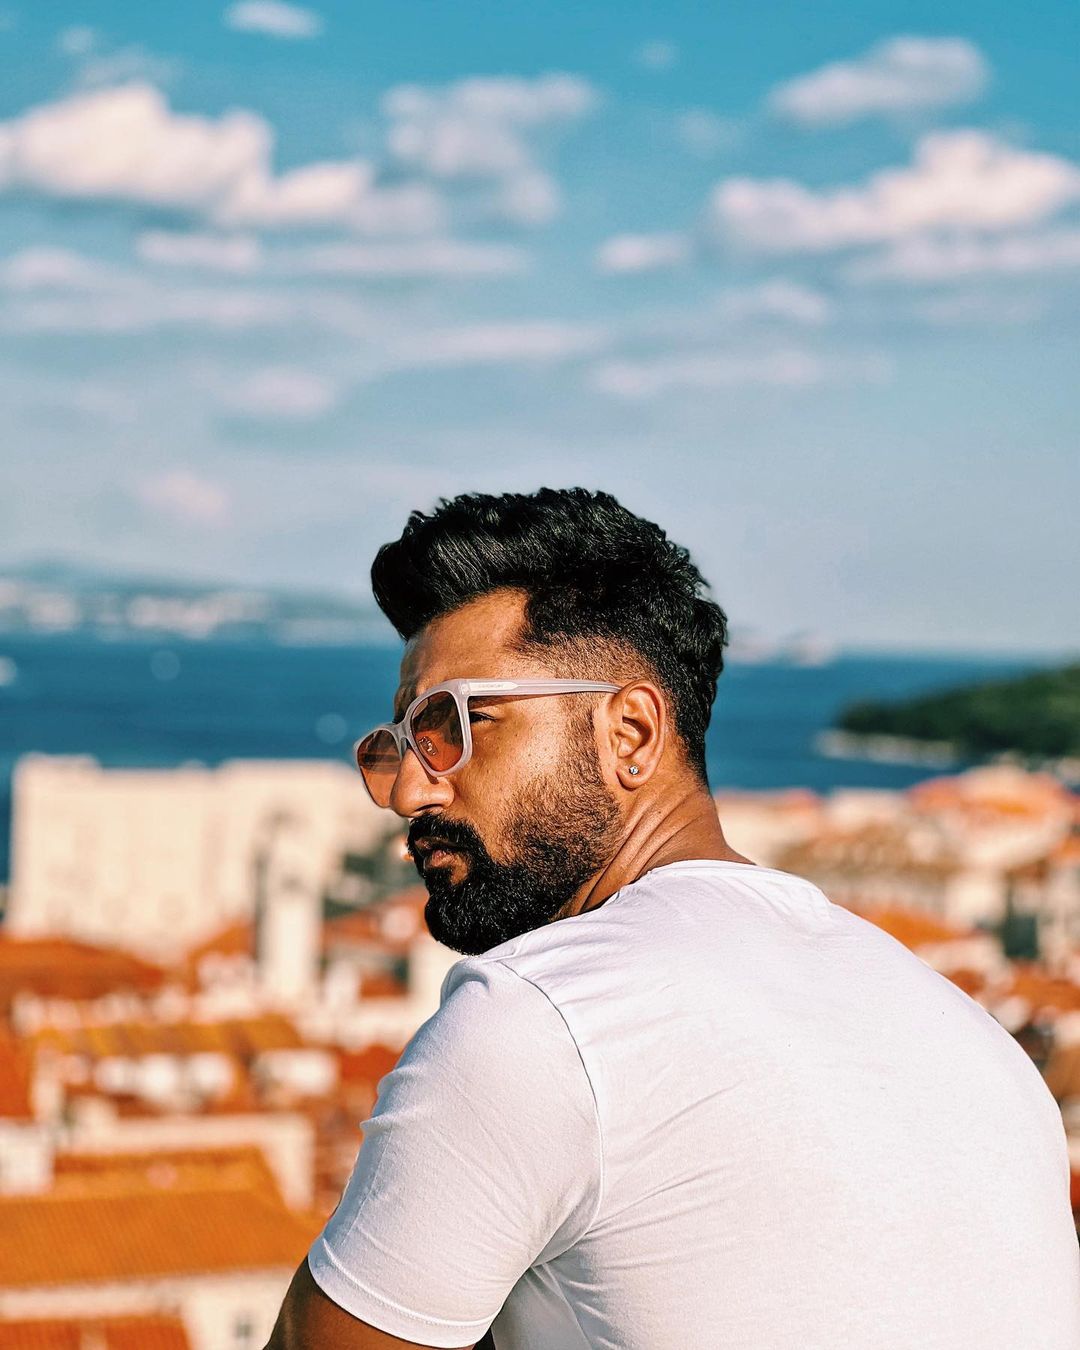 Vicky Kaushal's swoonworthy photos from Croatia will cure your Monday blues